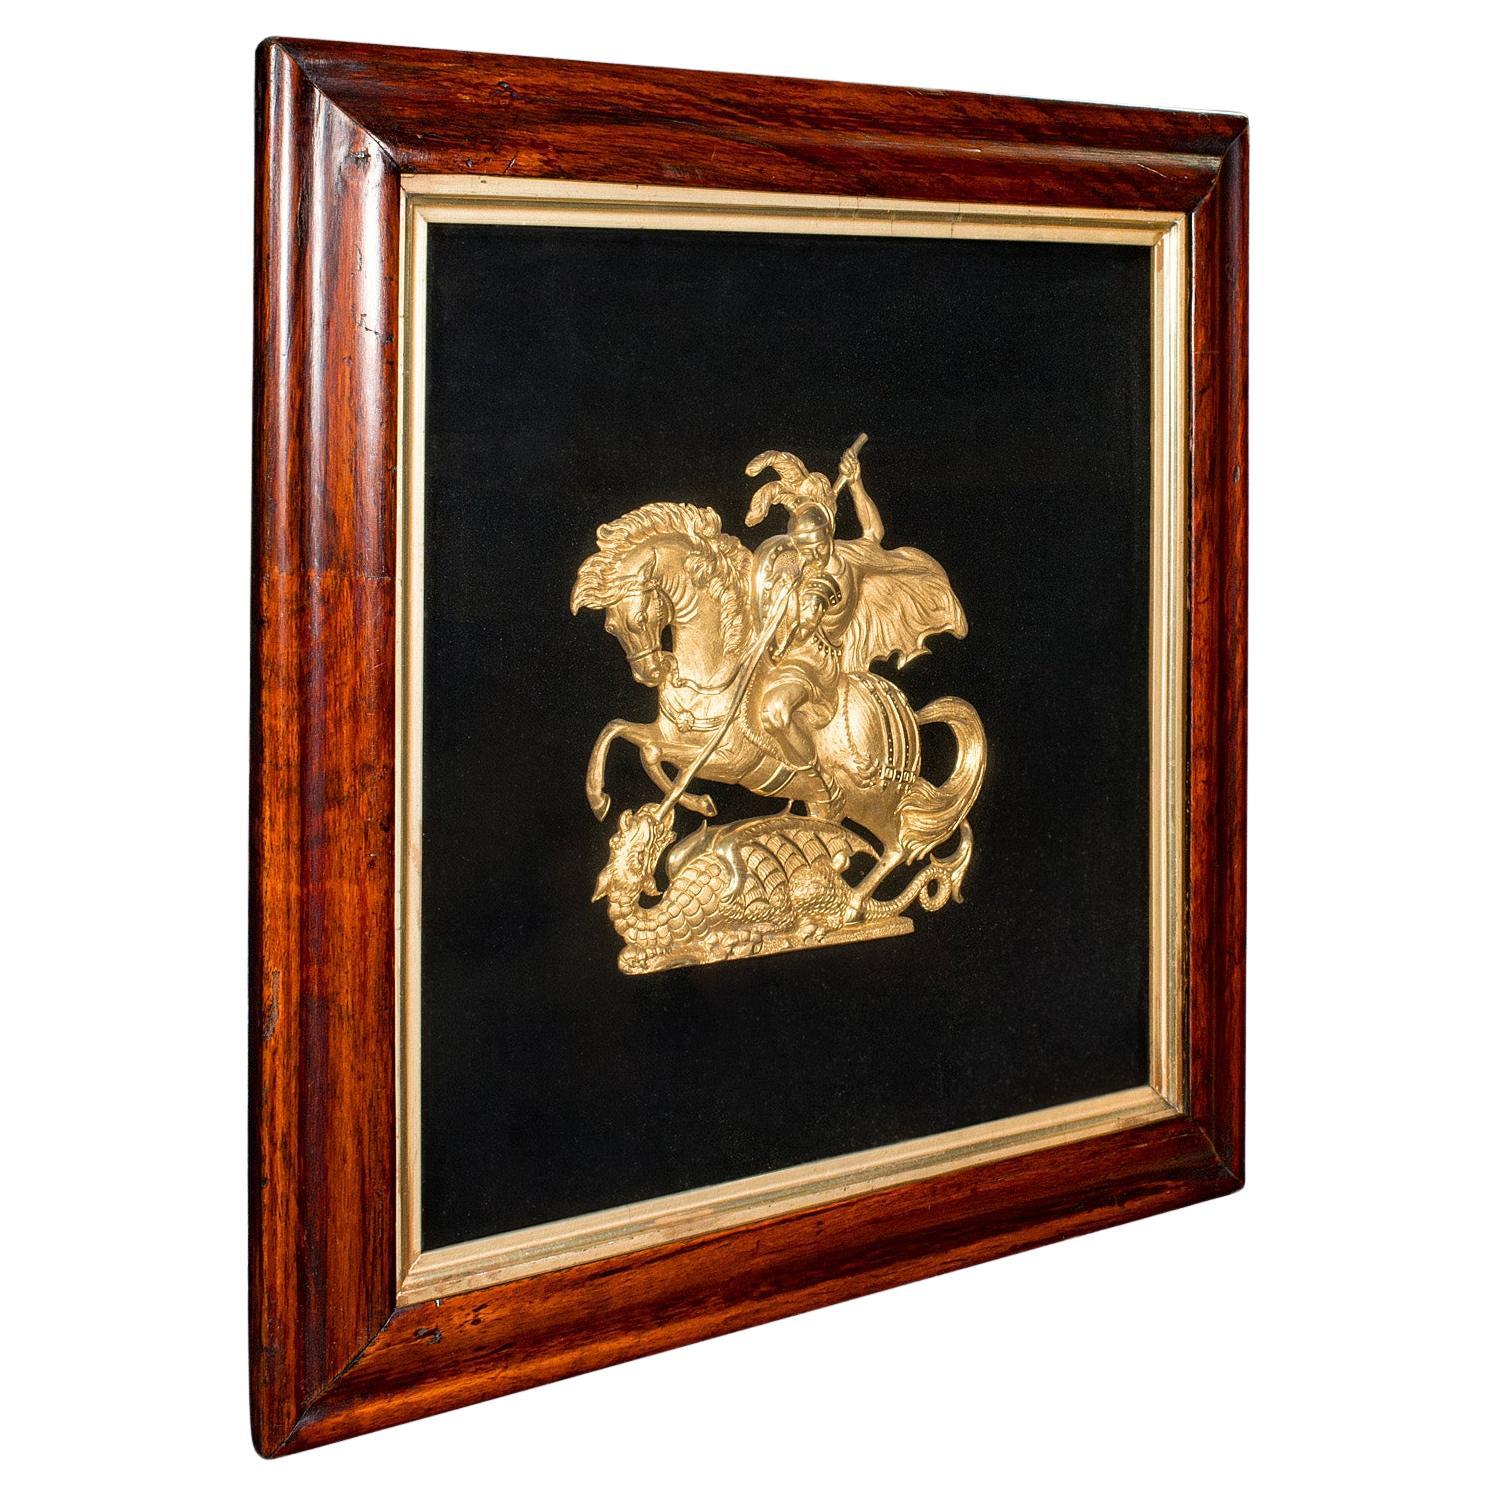 Antique George & The Dragon Display Plaque, English, Decorative Relief, Regency For Sale